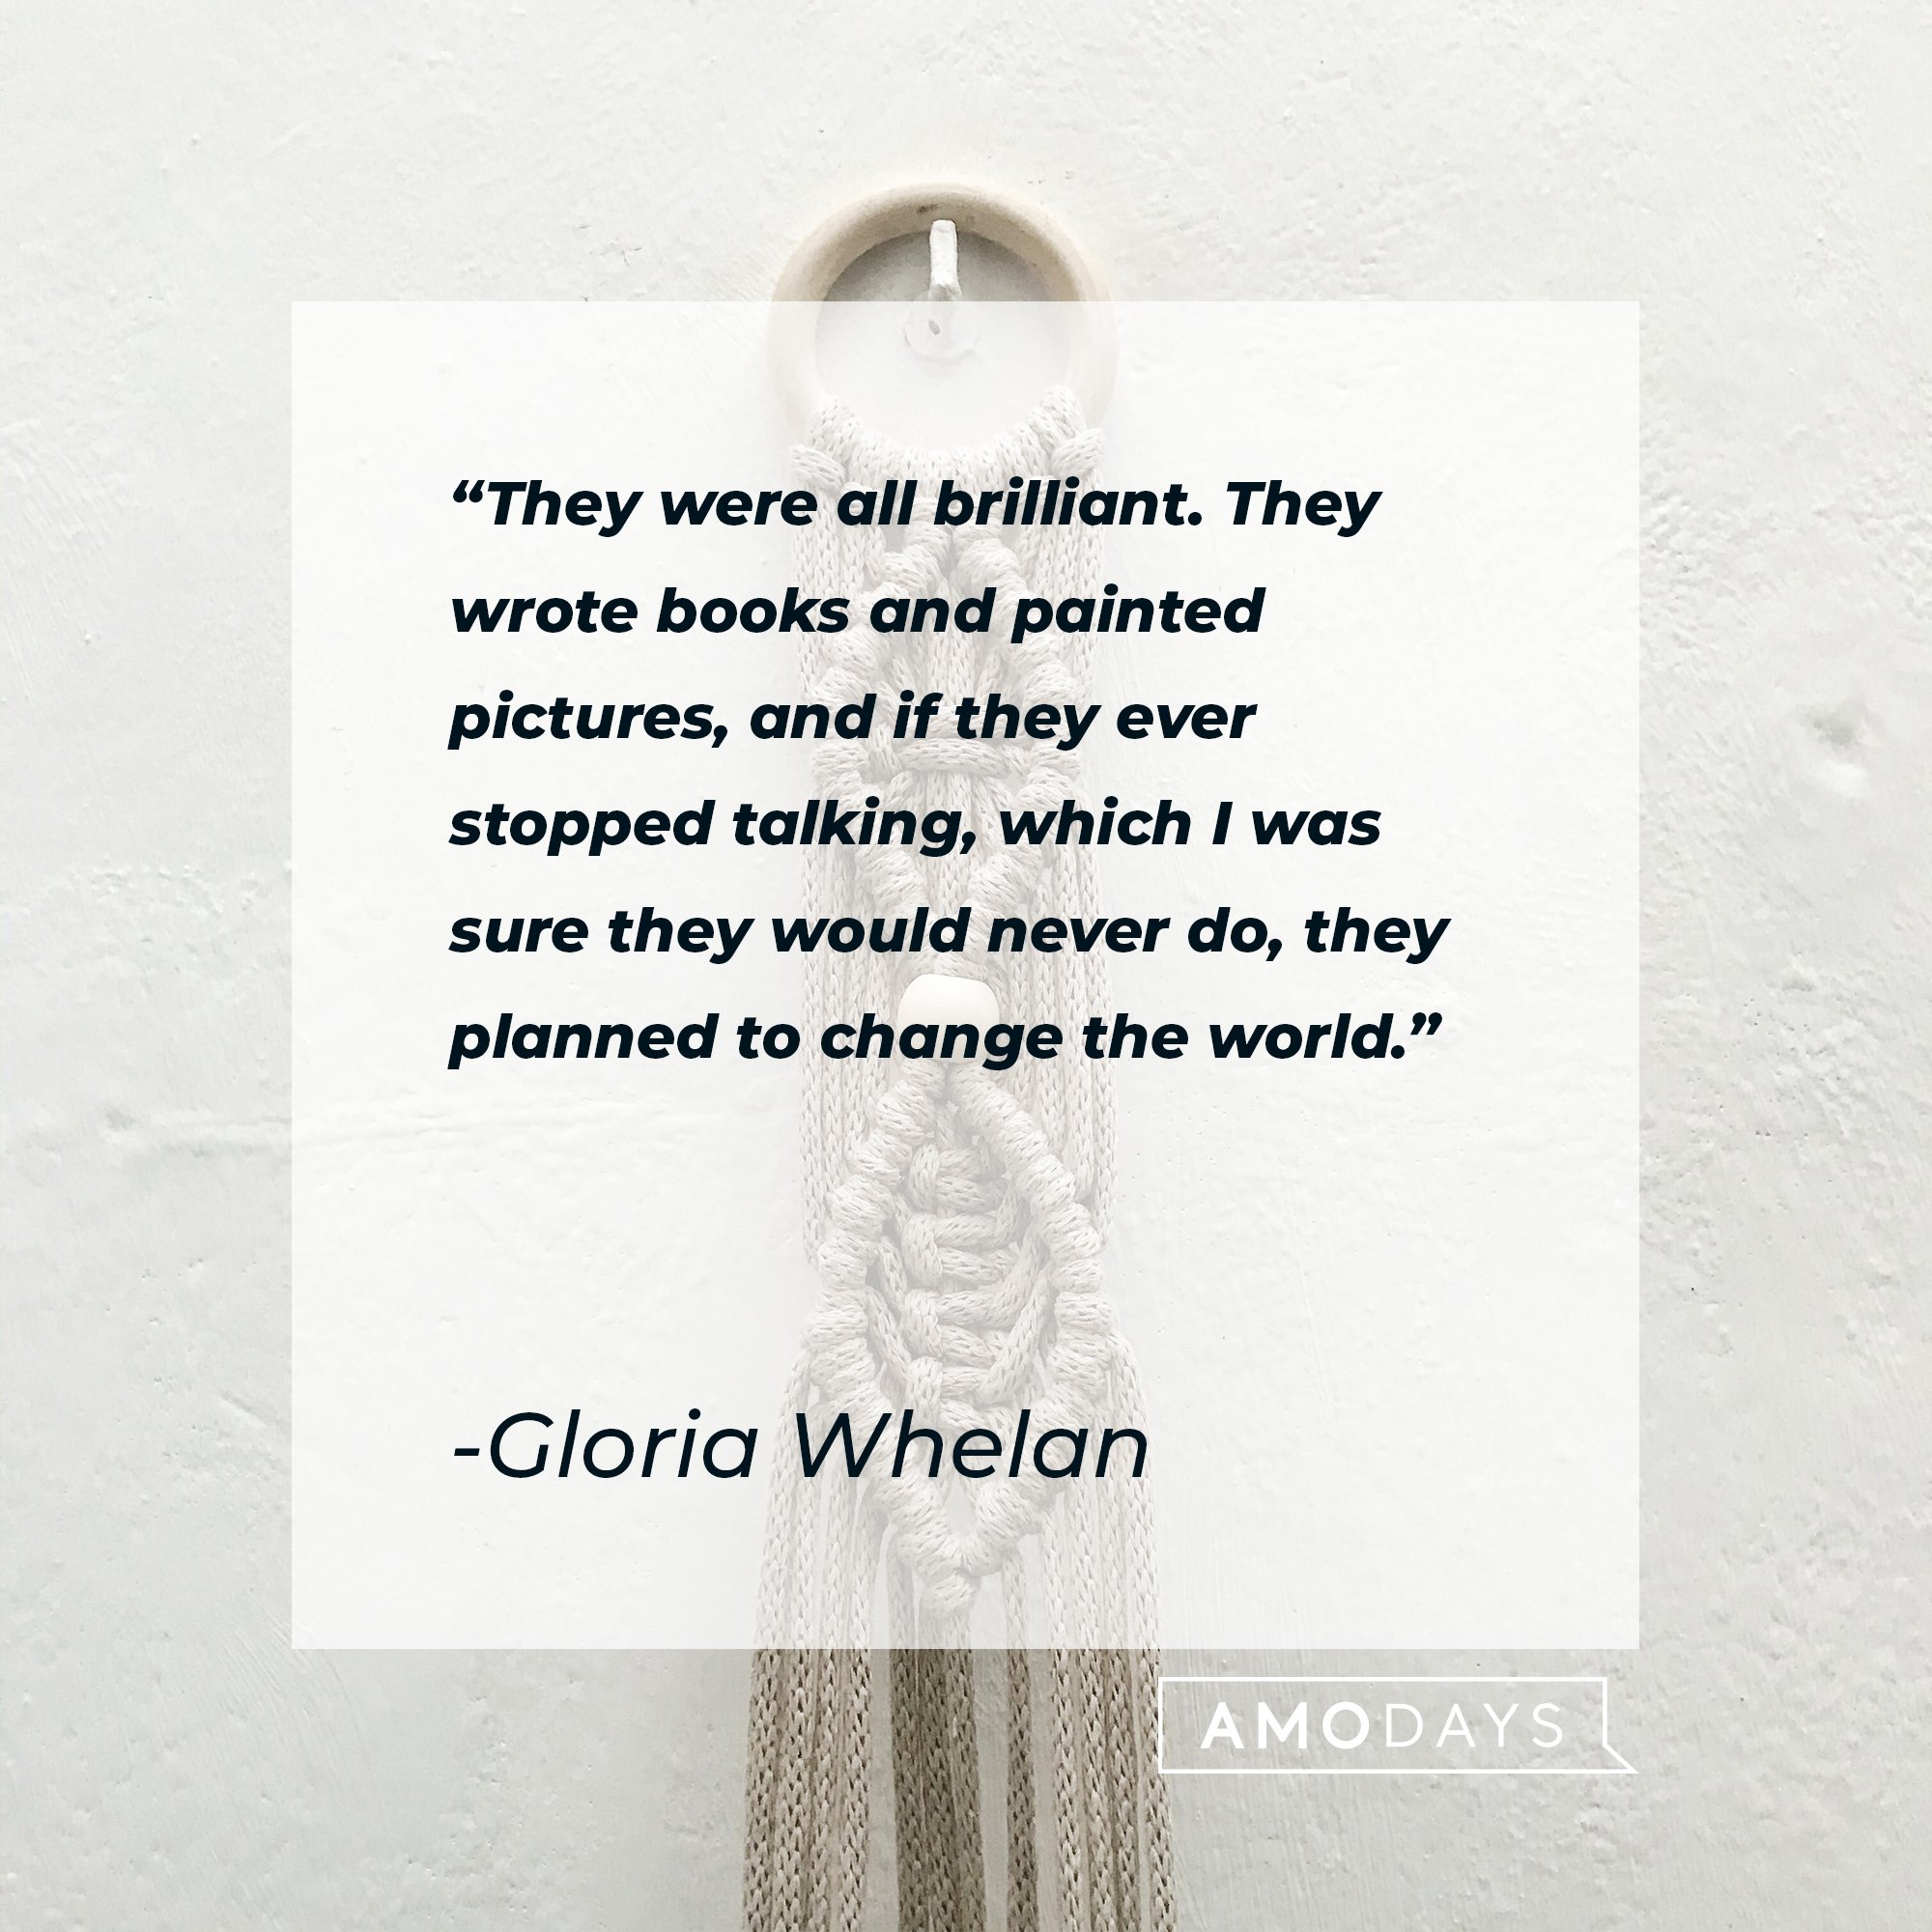 Gloria Whelan’s quote: "They were all brilliant. They wrote books and painted pictures, and if they ever stopped talking, which I was sure they would never do, they planned to change the world." | Image: AmoDays 